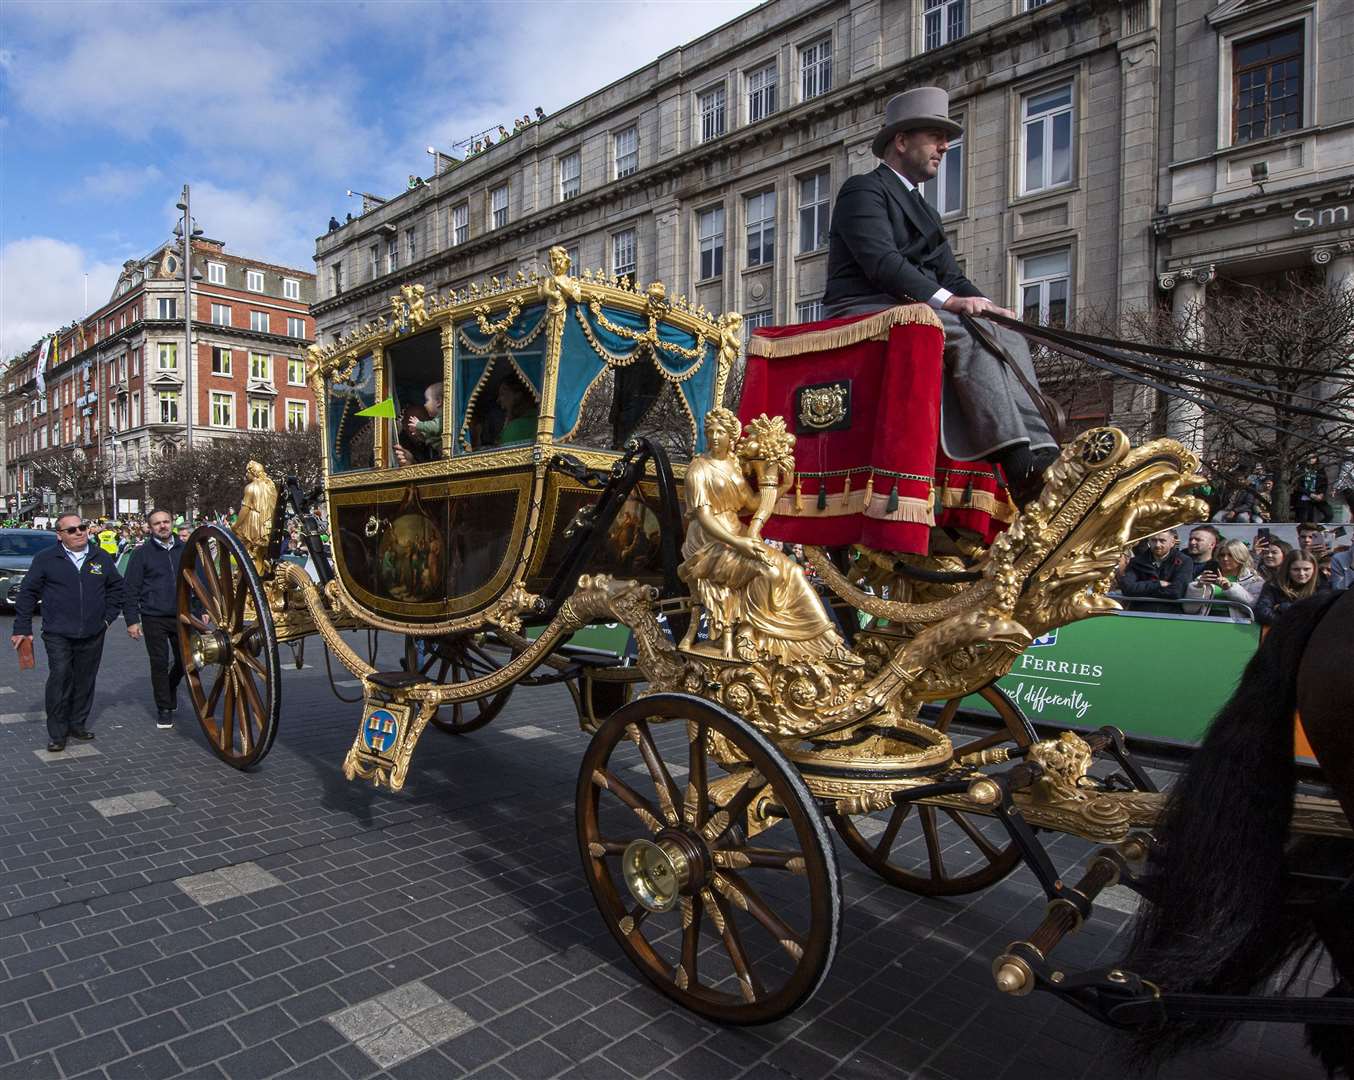 The Dublin Lord Mayor’s coach was ridden through the streets during the parade (Michael Chester/PA)